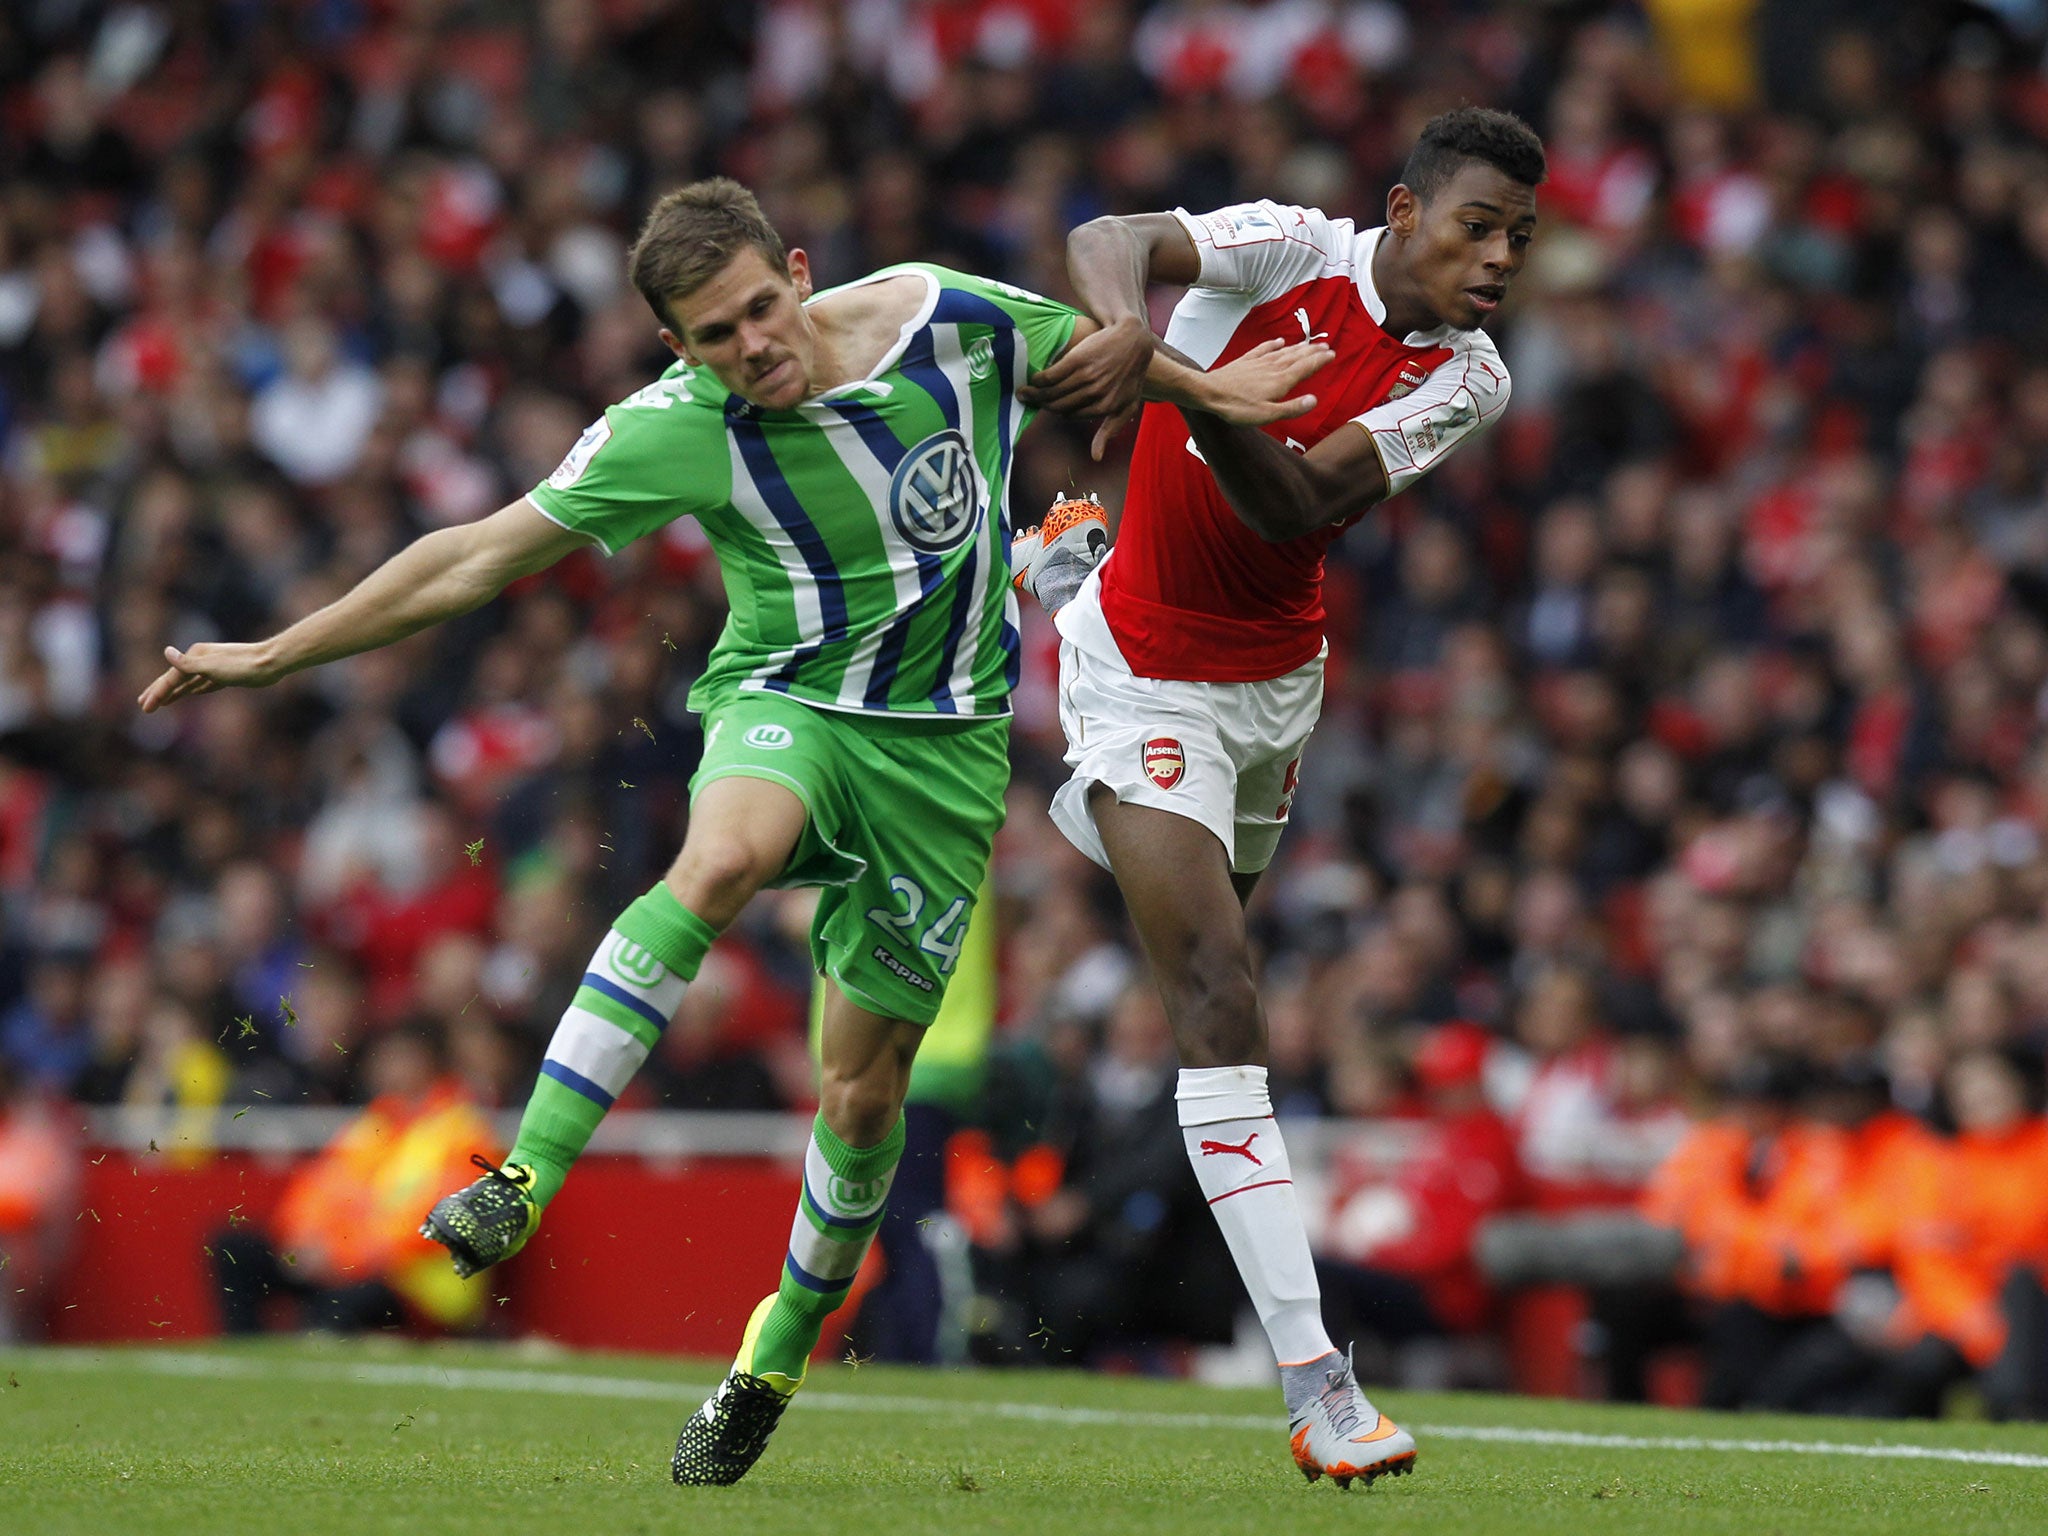 Jeff Reine-Adelaide competes with Sebastian Jung for the ball